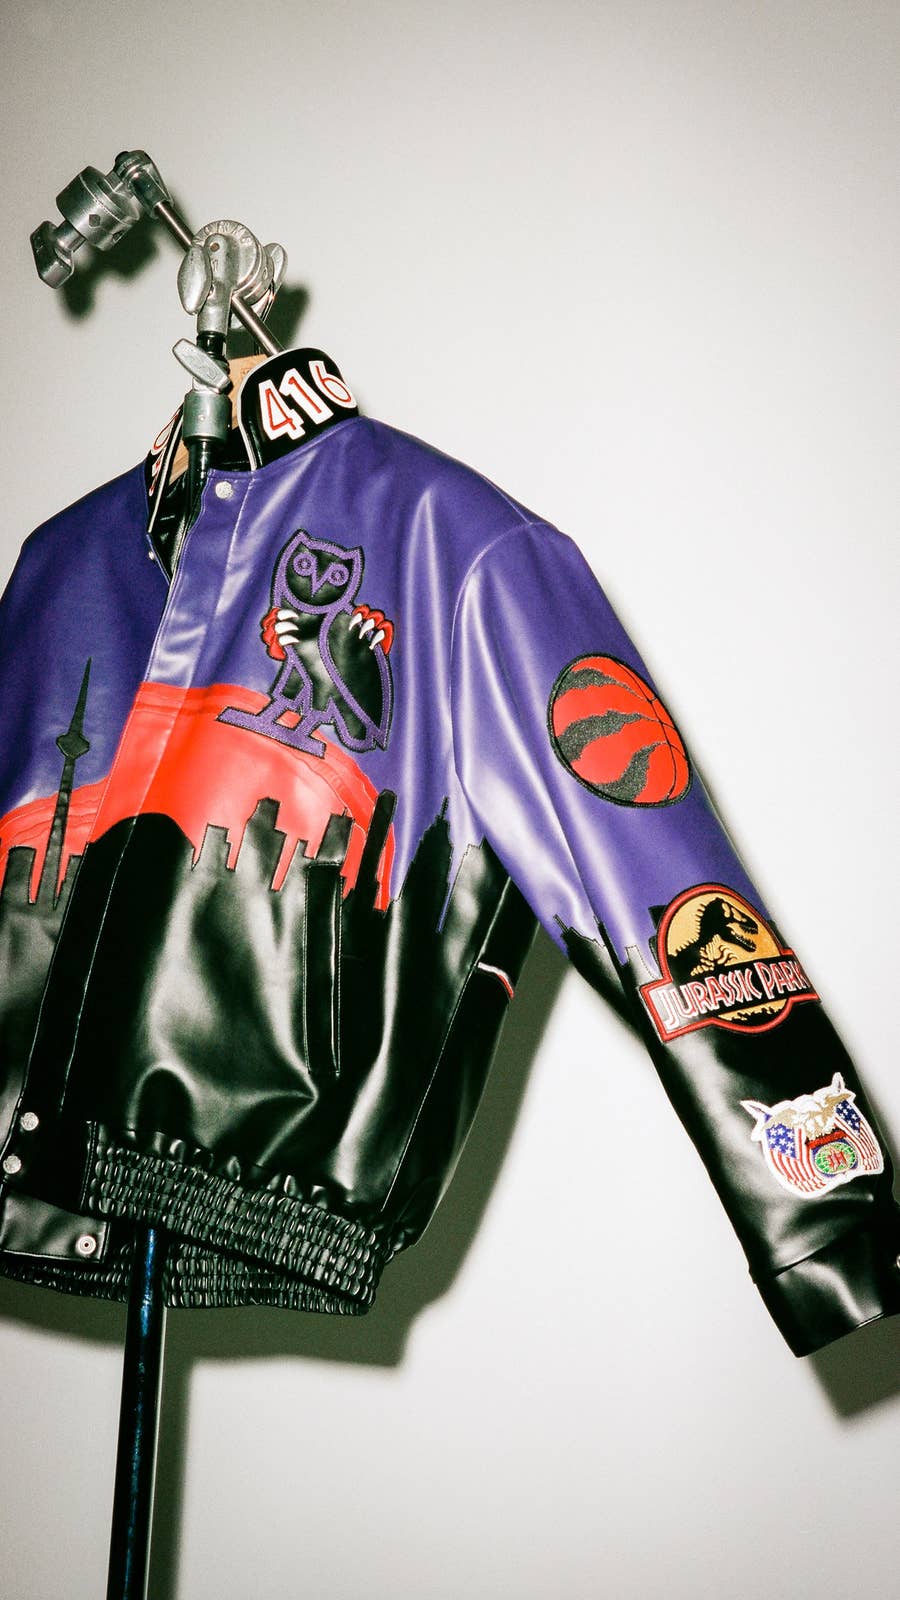 OVO and Raptors Unveil Jurassic Park Collection Featuring Dalano